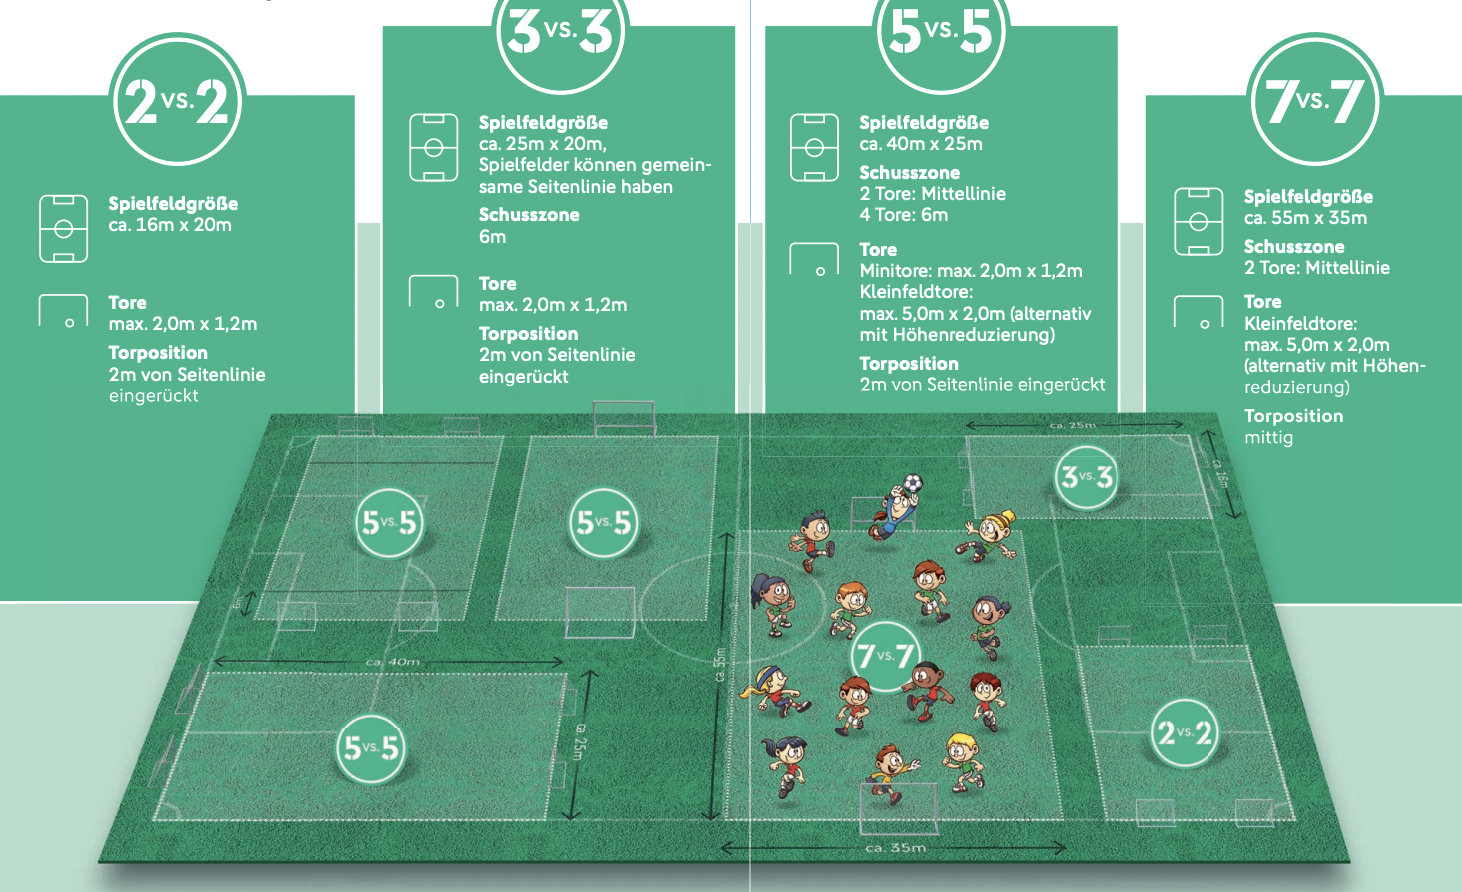 Specifications for the new game formats of the DFB.  The 7 against 7 is only authorized in U10 and U11.